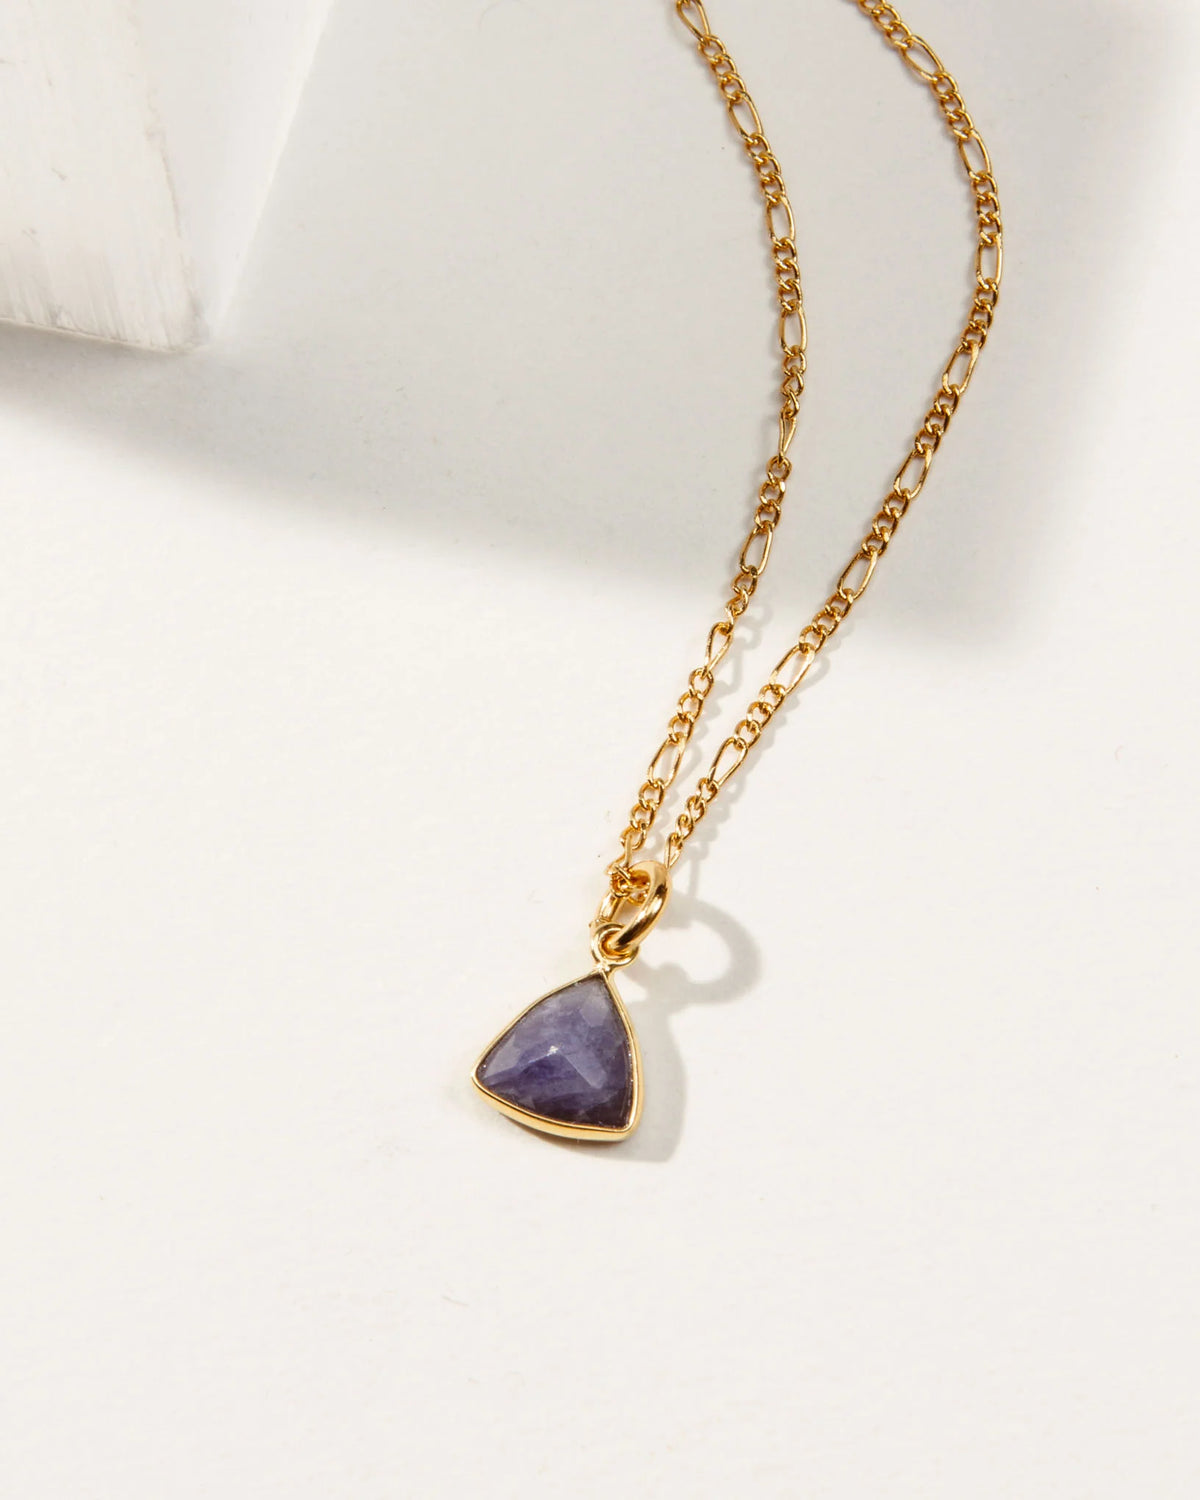 bermuda triangle dainty collar necklace in 14kt gold plated brass and tanzanite by luna norte jewelry